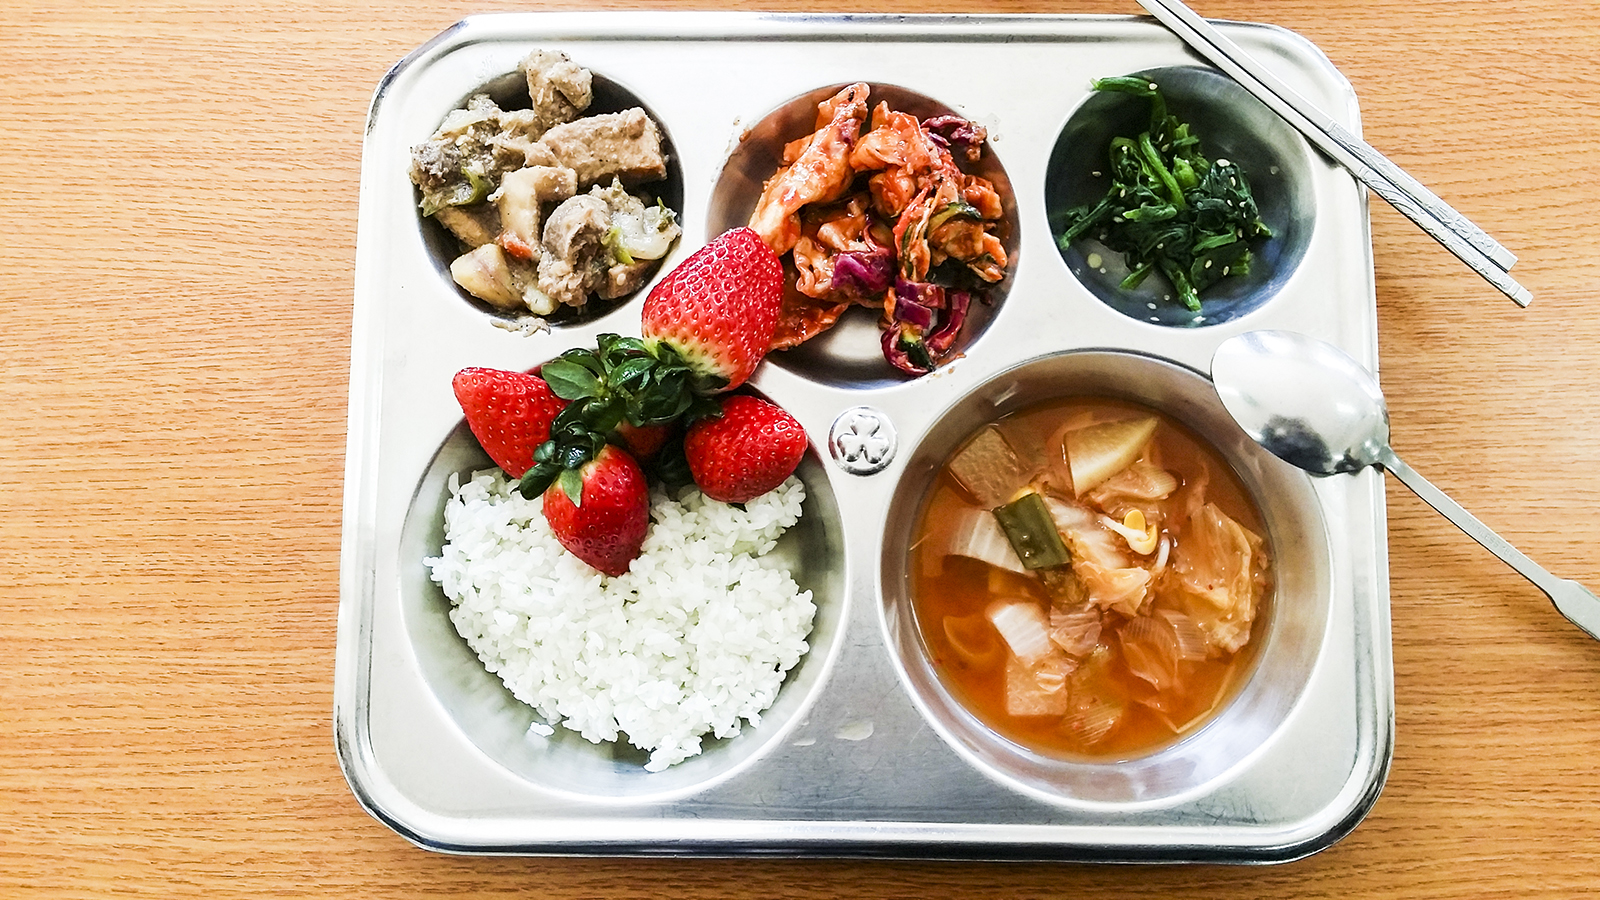 School lunch at middle school in Sangju, South Korea: Kimchi, Strawberries.